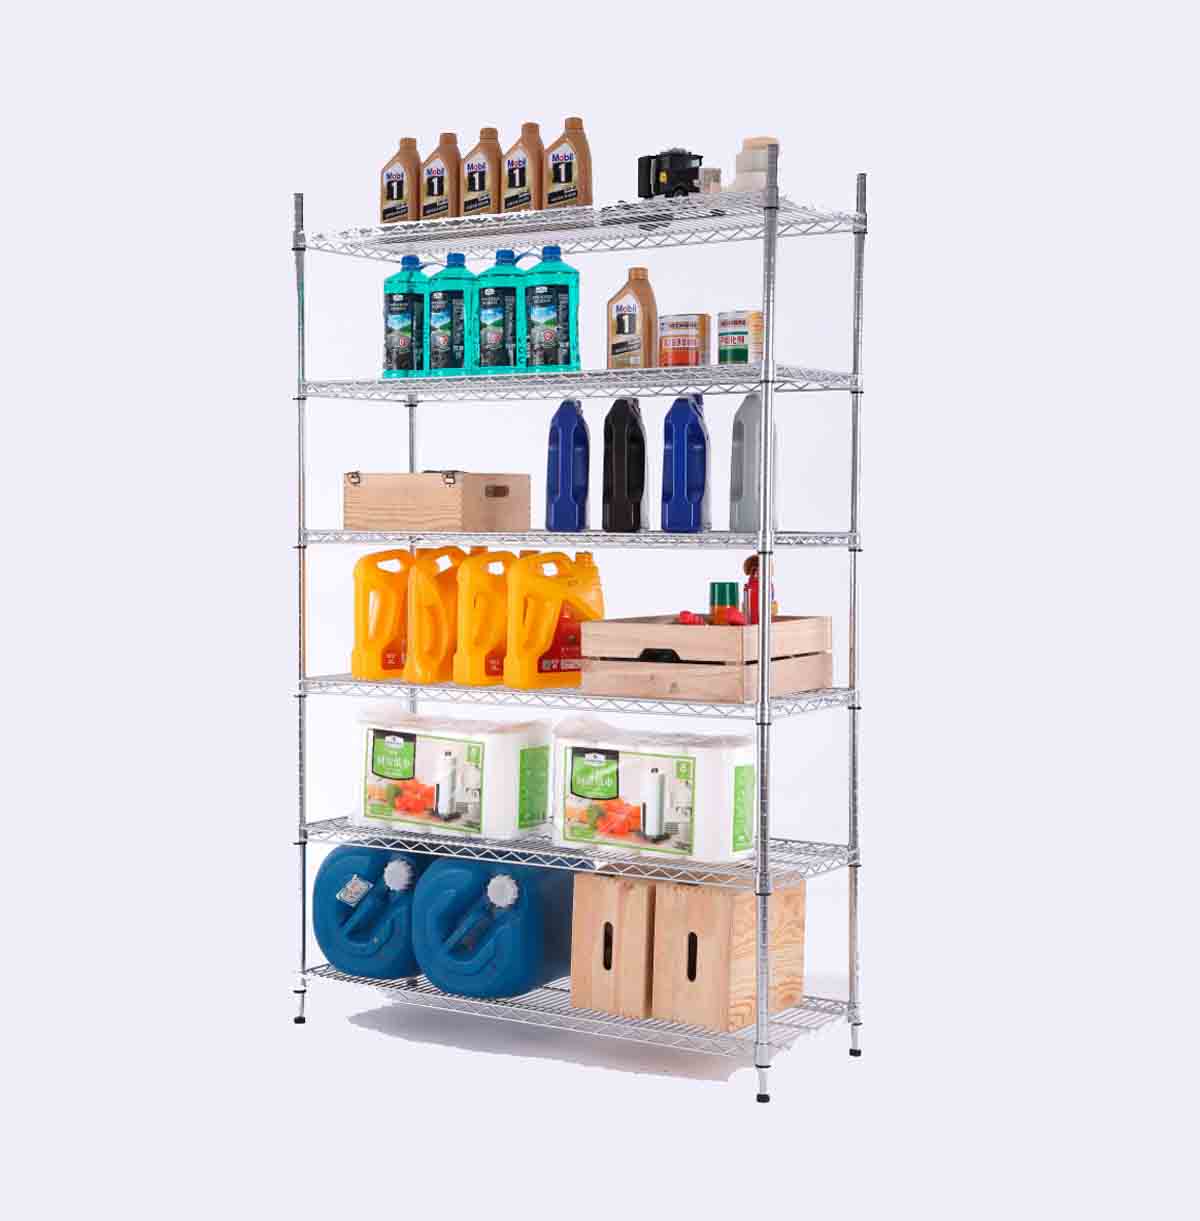 6-Tier Storage Shelving Units for Retail Store / Retail Shelving Display Unit / Retail Display Racks